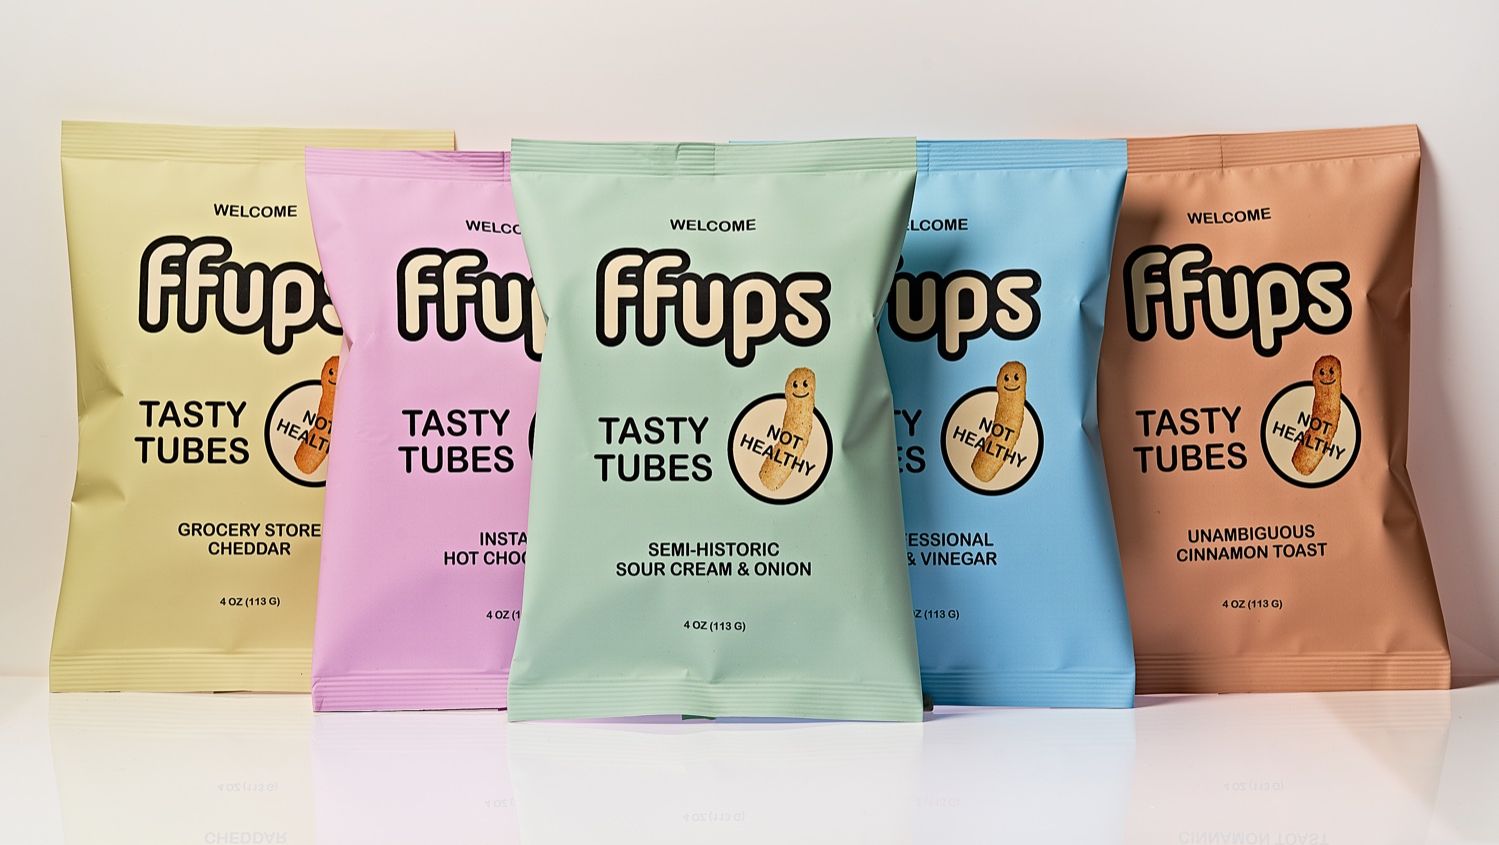 Tired Of Healthy Brands and Blanding? FFUPs Makes A Case For Absurdly Literal Packaging